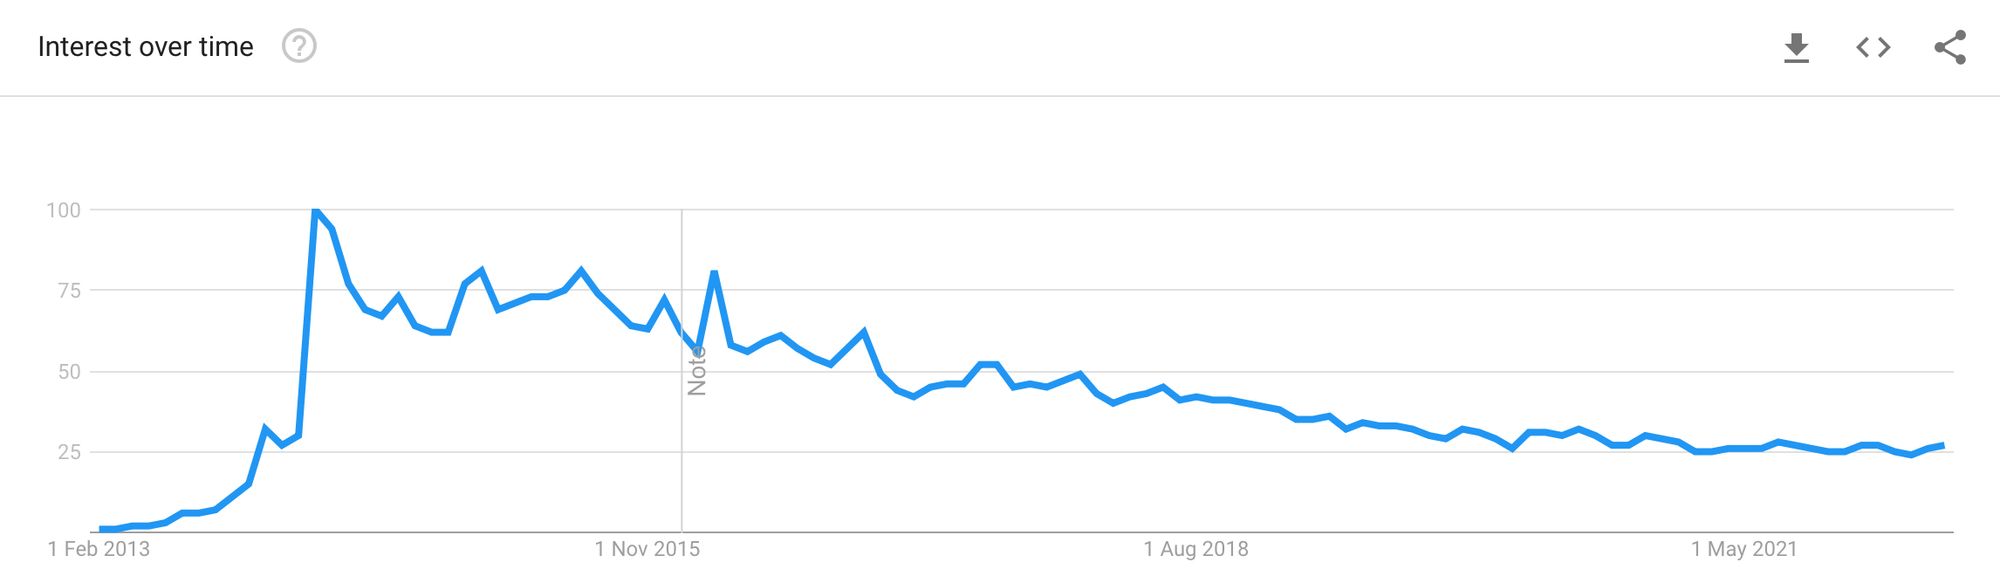 Google trends graph of the worldwide interest over time for the search term ‘selfie’